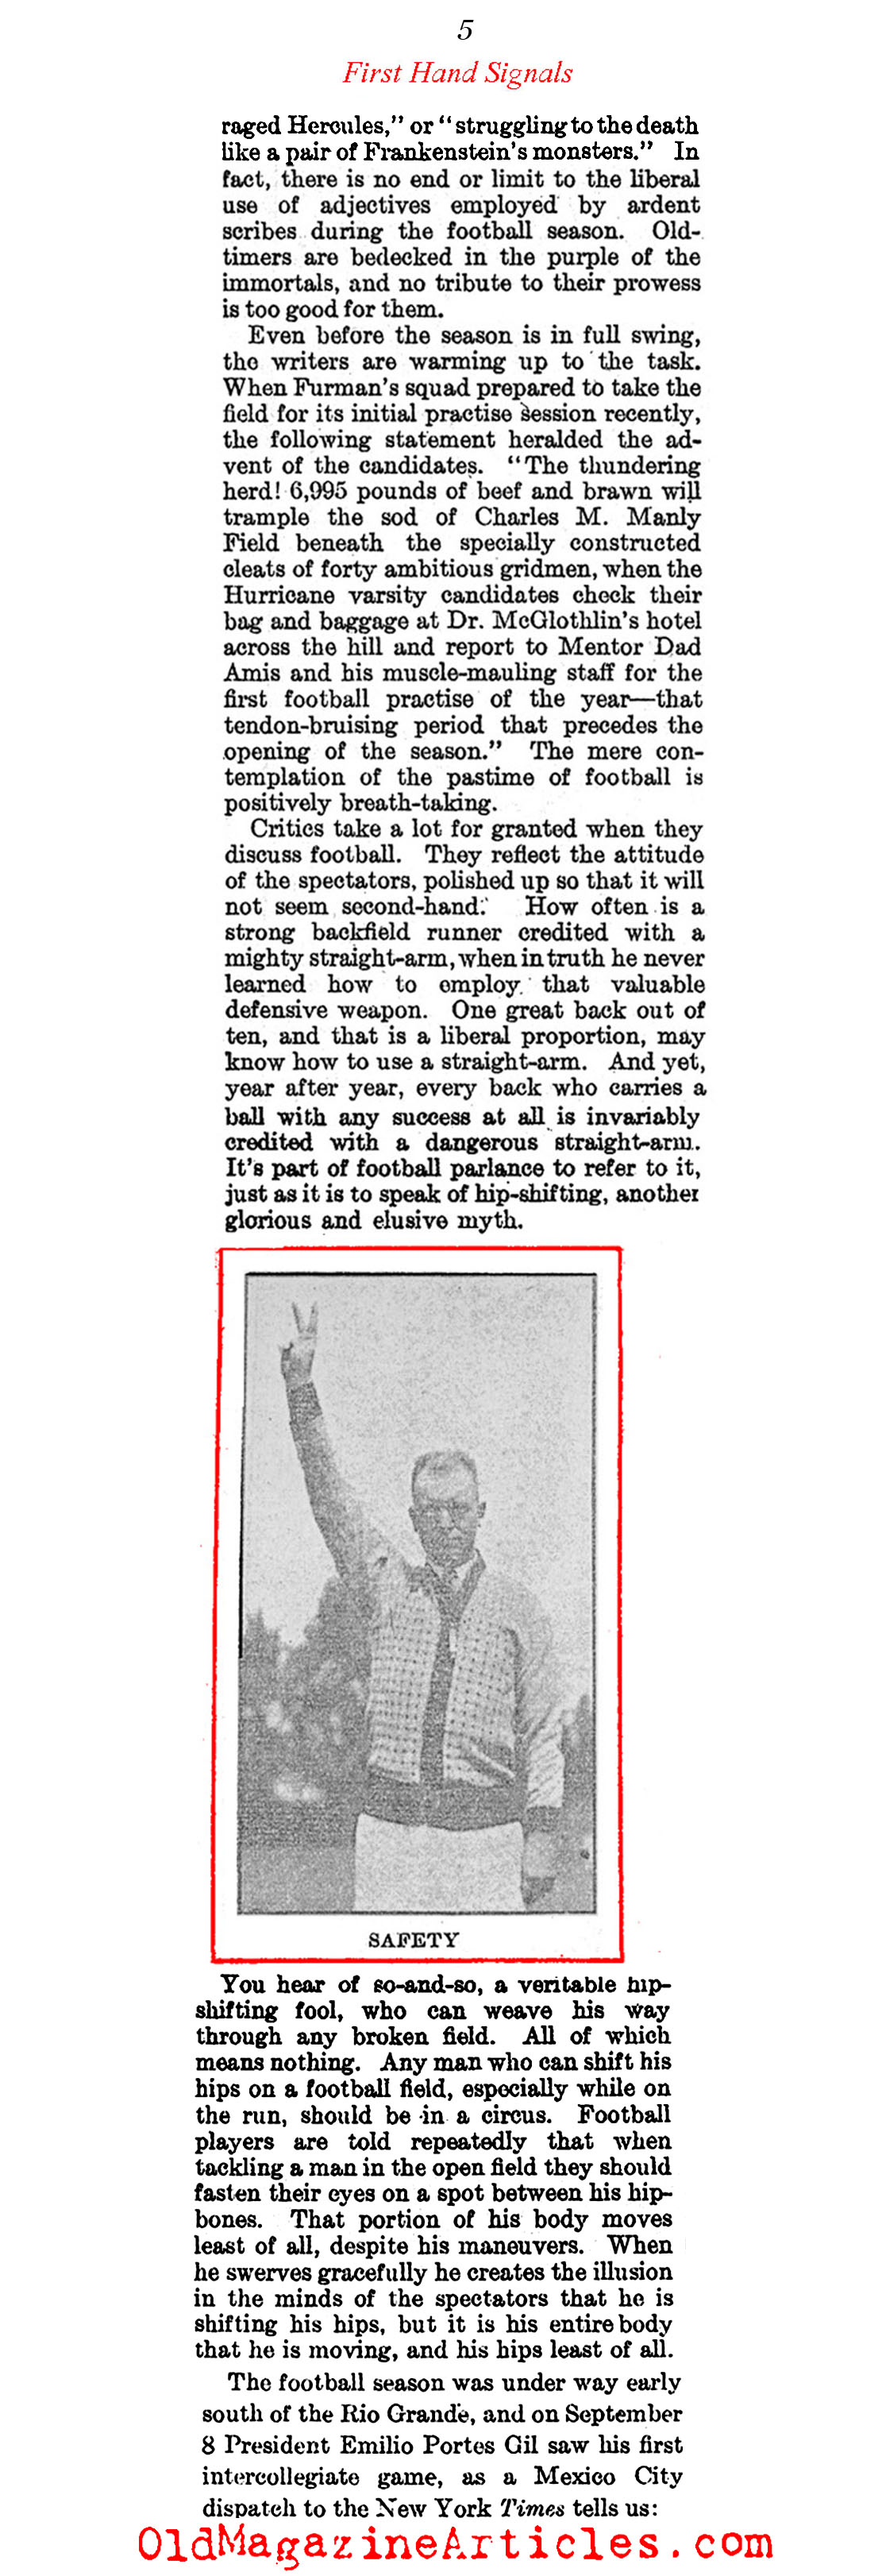 The Very First Football Referee Hand Signals (Literary Digest, 1929)